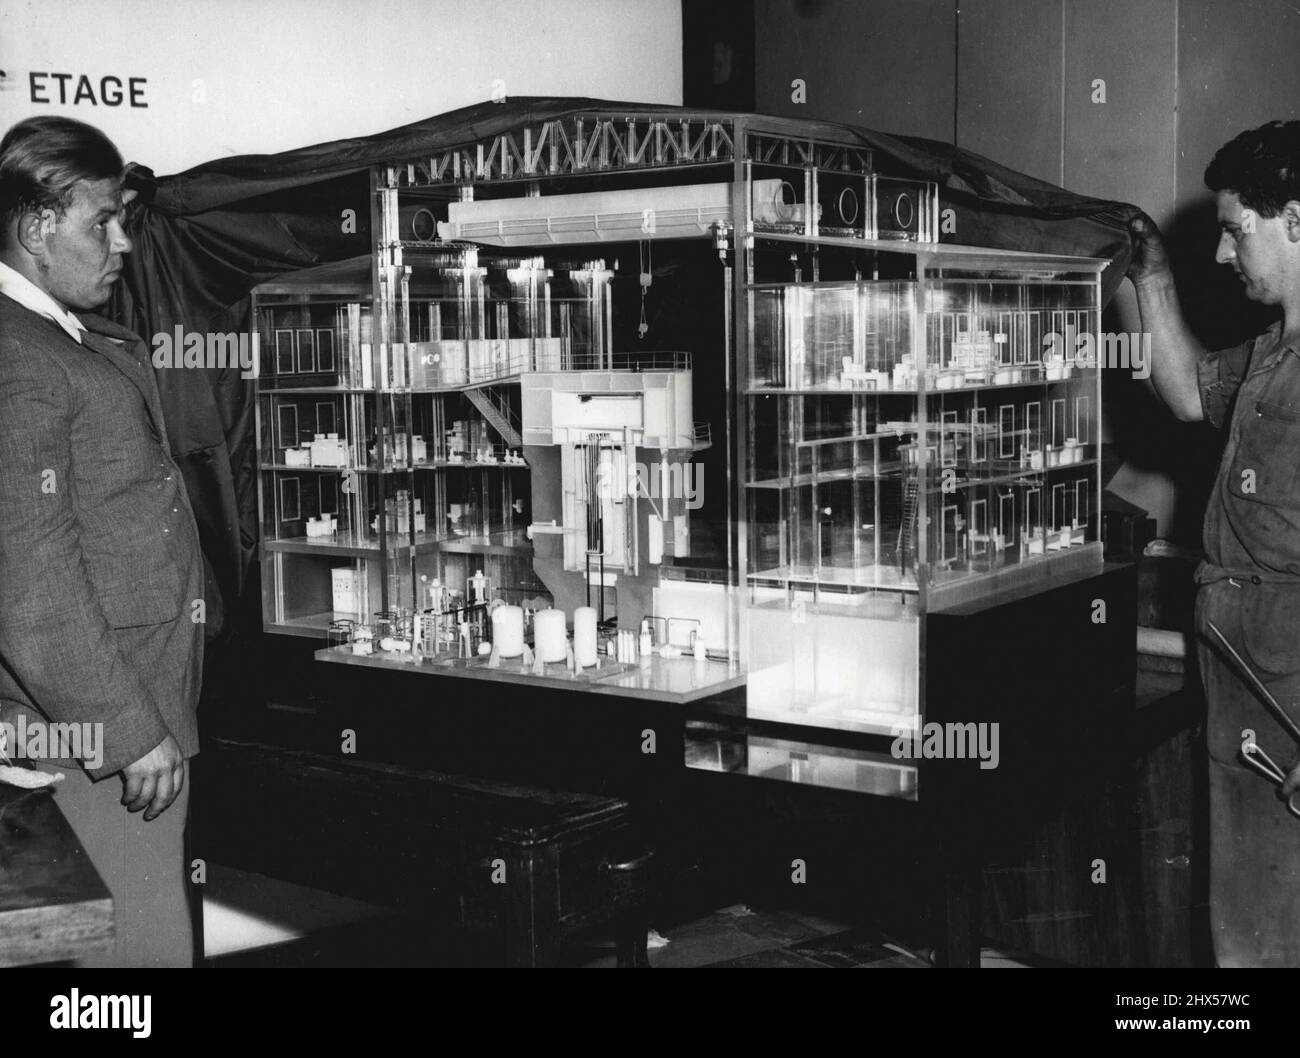 Soviet's Atom Exhibit. Russia Engineers and Swiss Workmen in Geneva unveil a plastic glass reproduction of a heavy water research reactor 'operating somewhere in central Russia', to be shown at the exhibition to be held in connexion with the international conference on the peaceful uses of Atomic energy, which opens in the Palais De Nations, August 8. August 15, 1955. (Photo by Associated Press Photo). Stock Photo